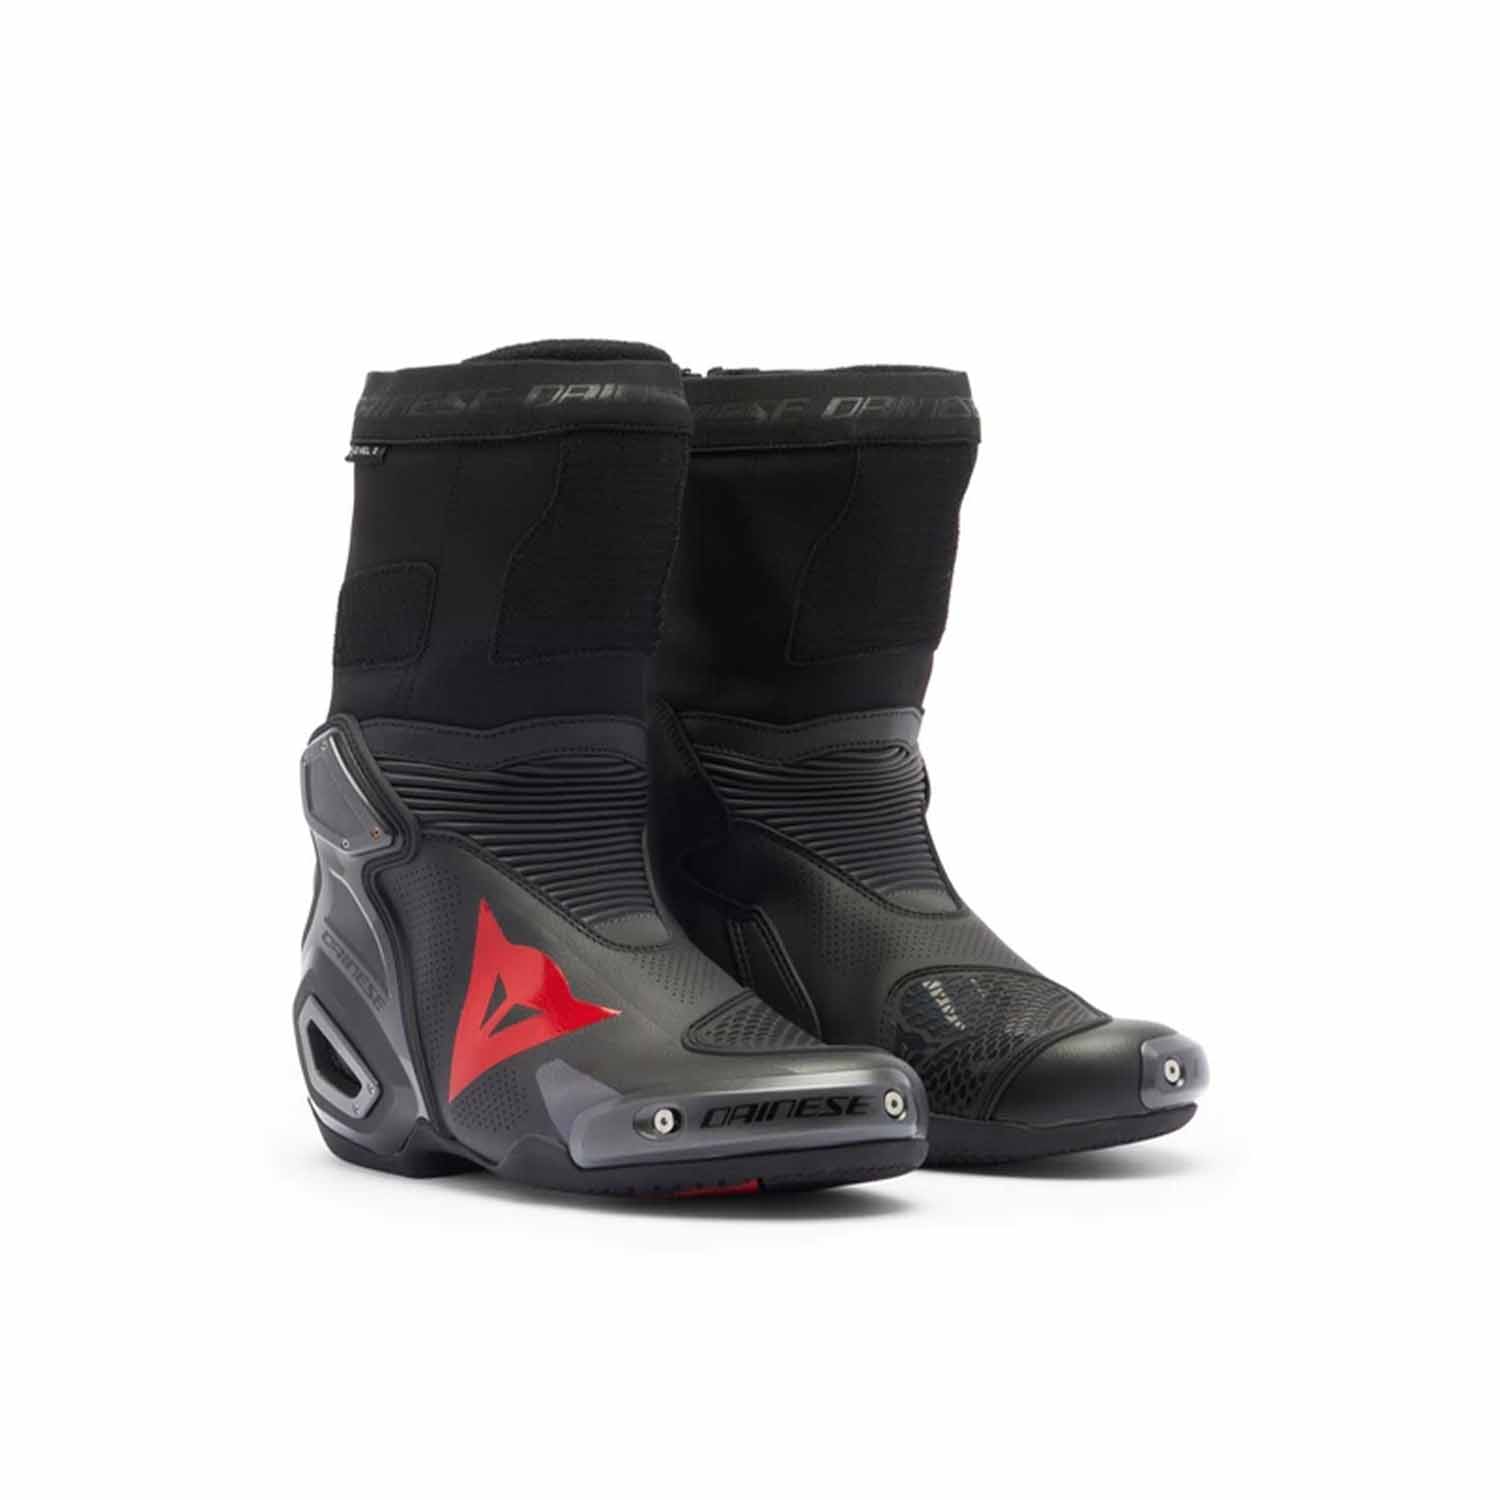 Image of Dainese Axial 2 Air Boots Black Red Fluo Size 41 ID 8051019739735